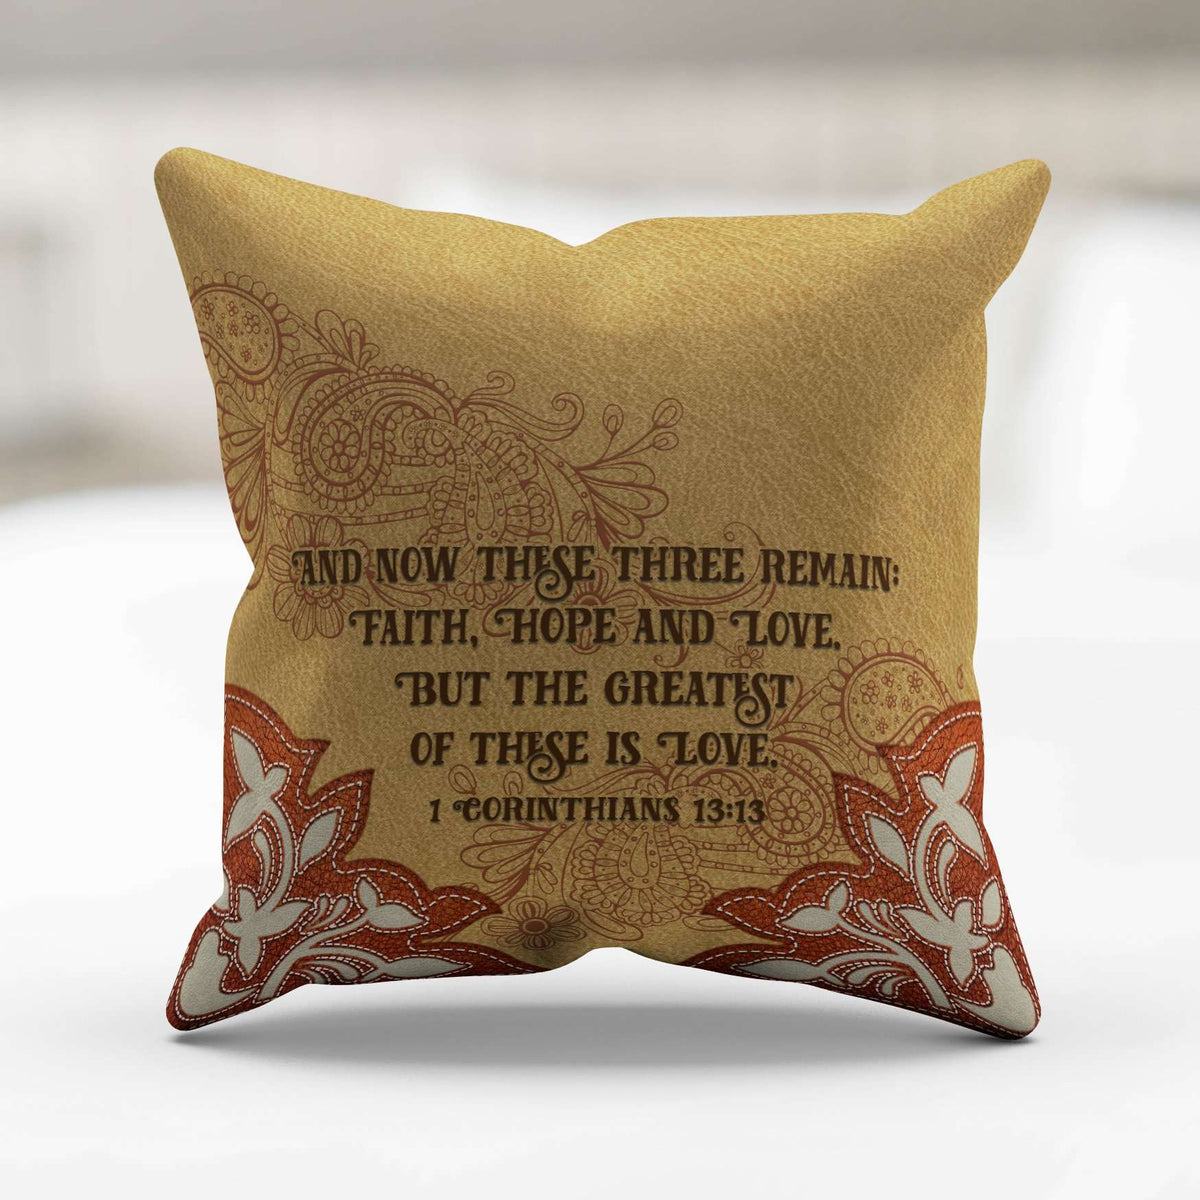 Designs by MyUtopia Shout Out:Faith Hope Love 1 Corinthians 13:13 Bible Verse Country Western Accent Pillowcase,Tan,Pillowcases